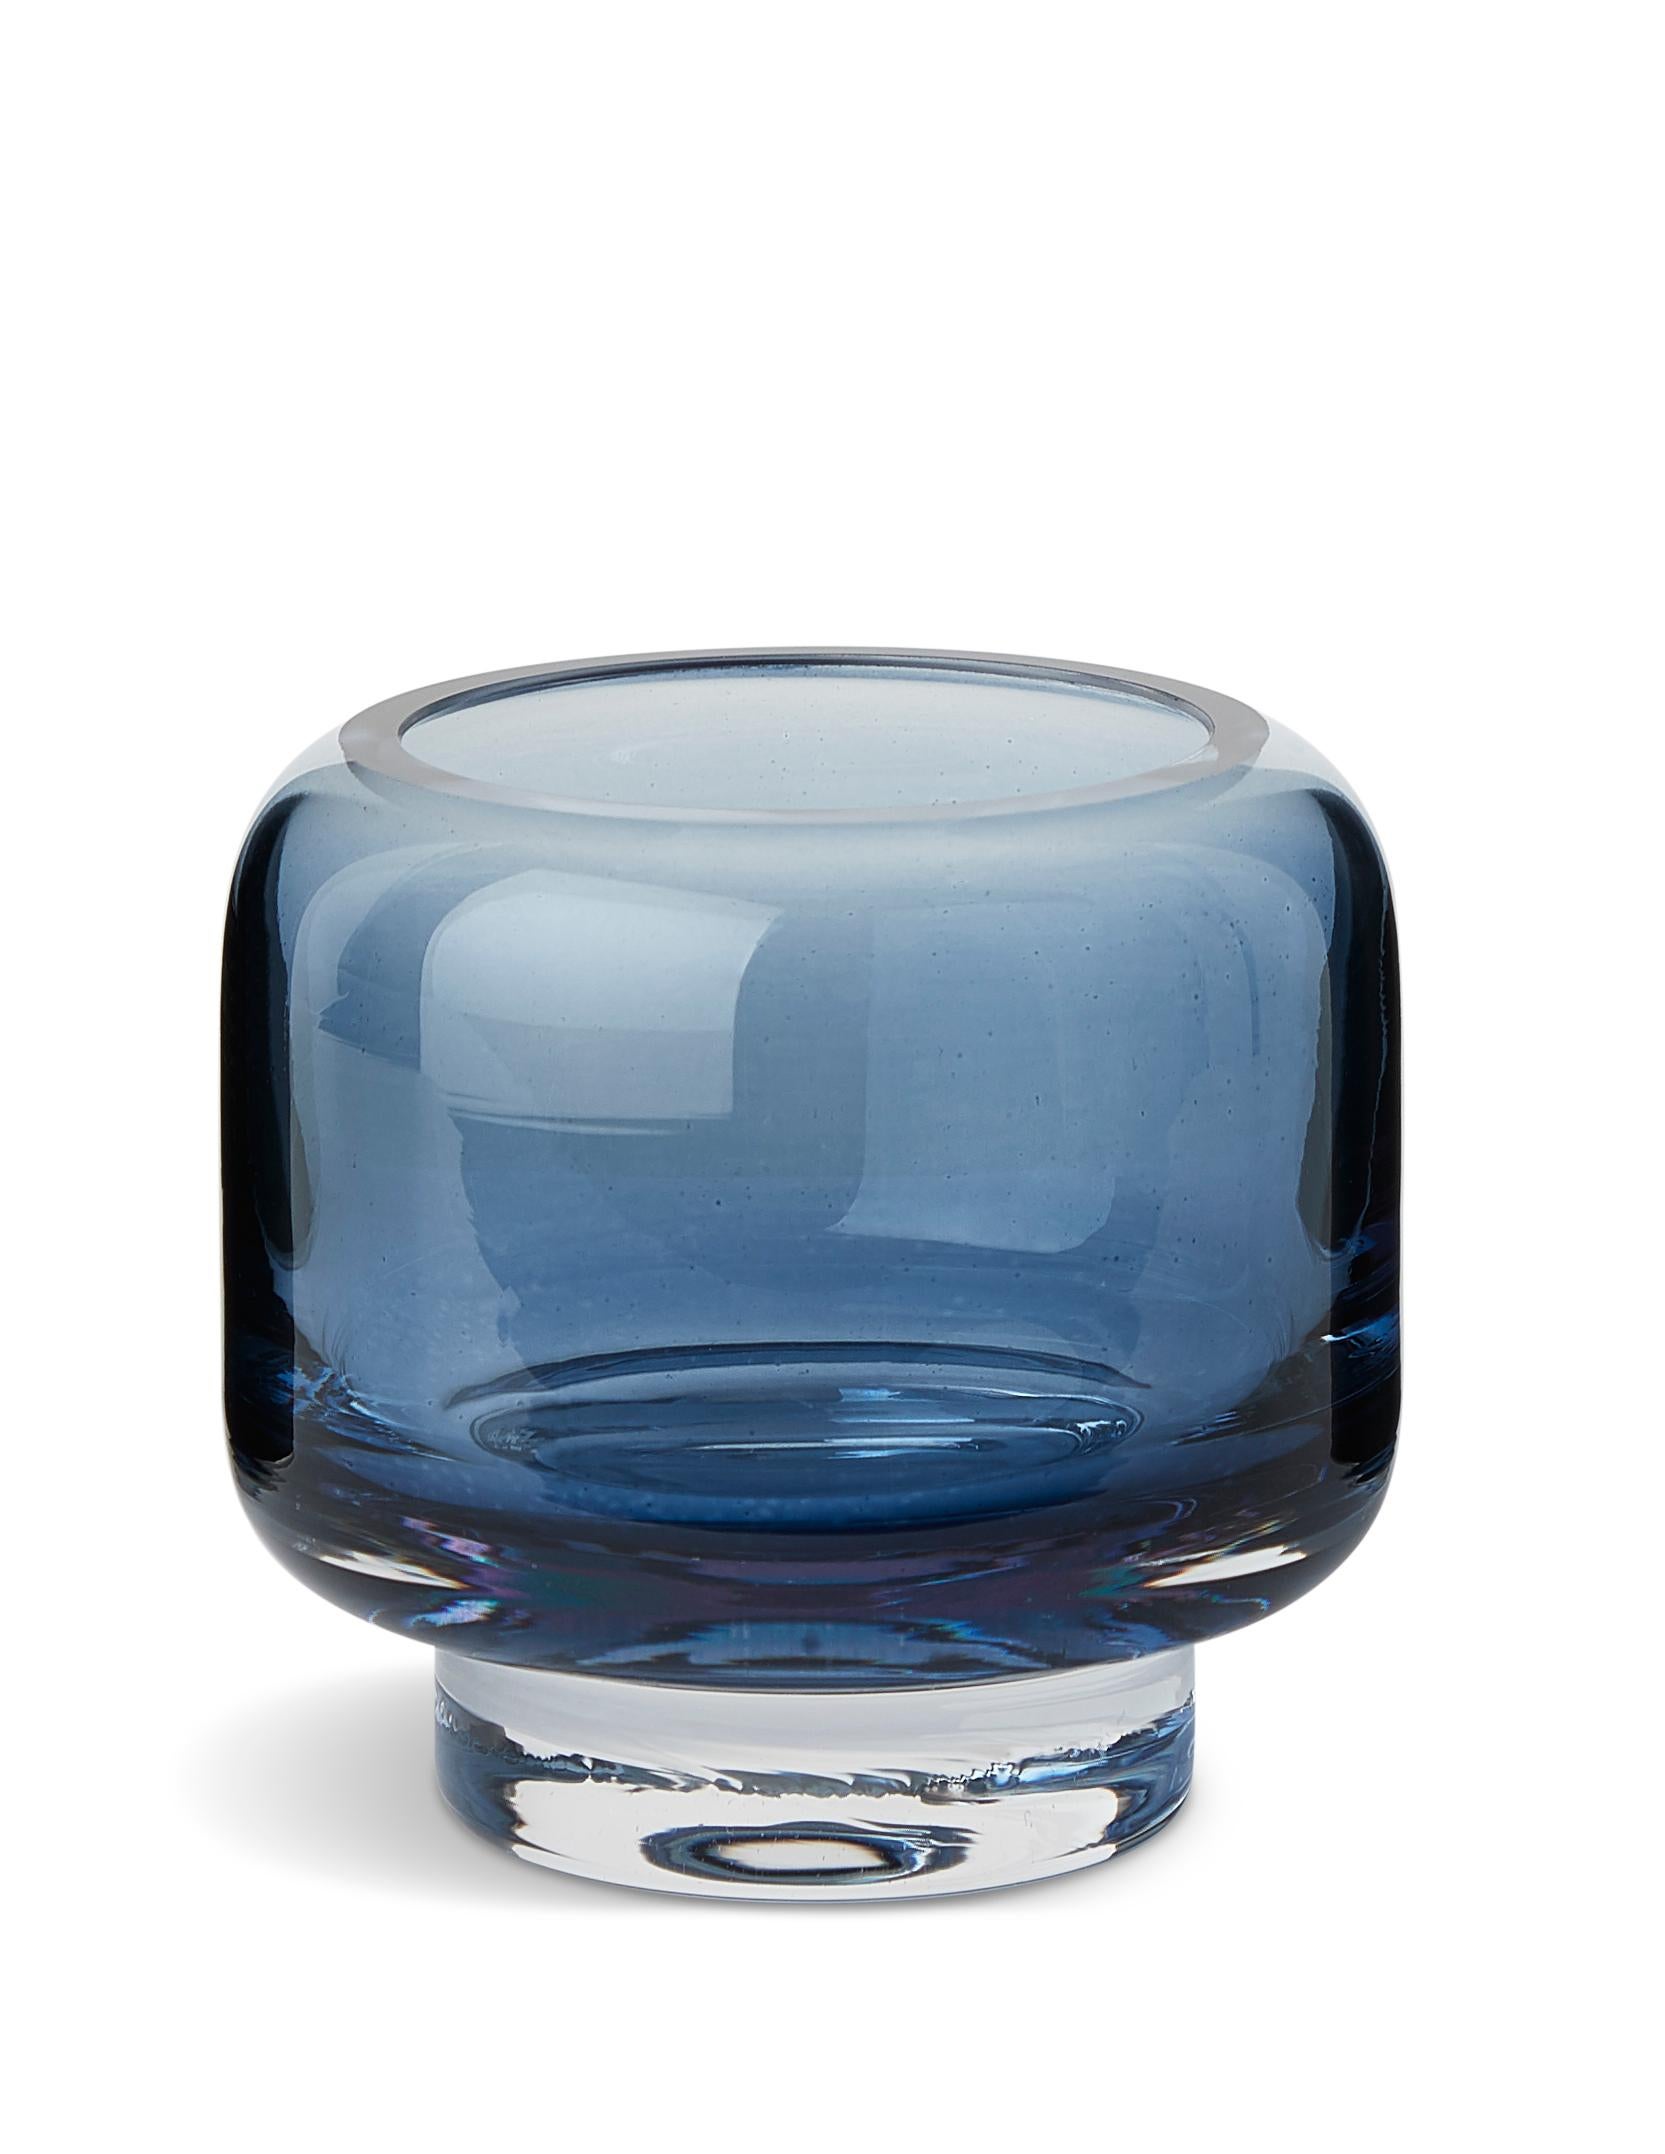 Blue (Petrol Glass) Stack Large Tealight, by Studio Føy from Warm Nordic